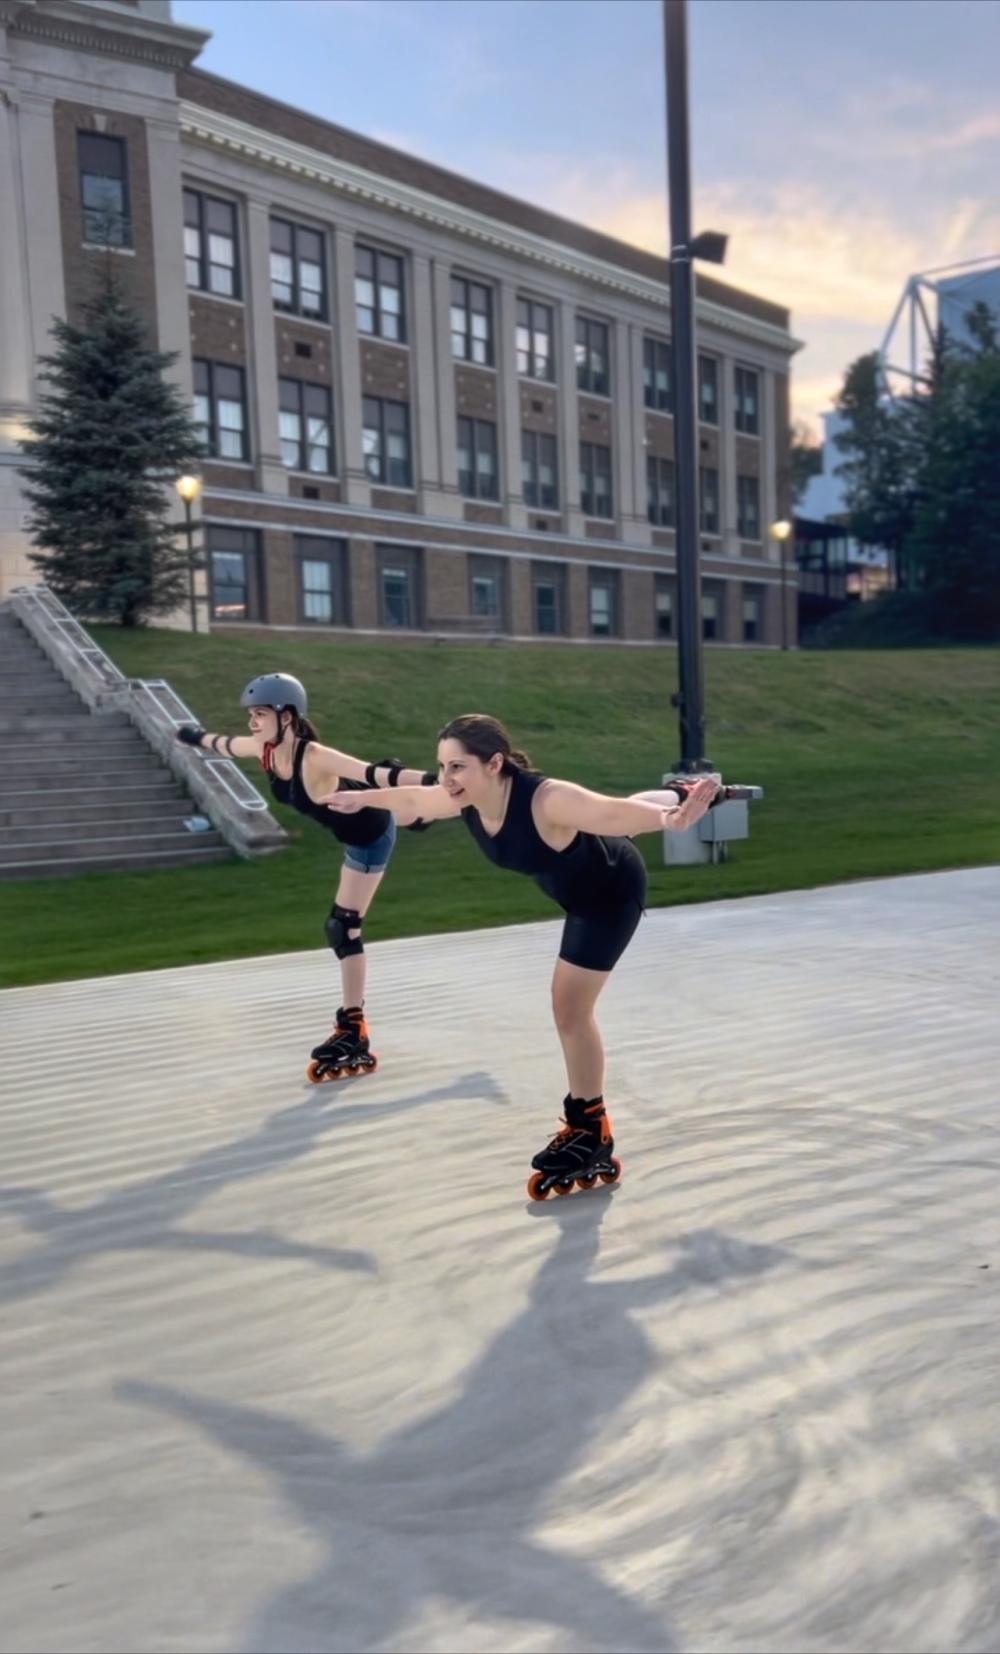 Two women inline skate side-by-side in figure skating poses, skating on one leg.